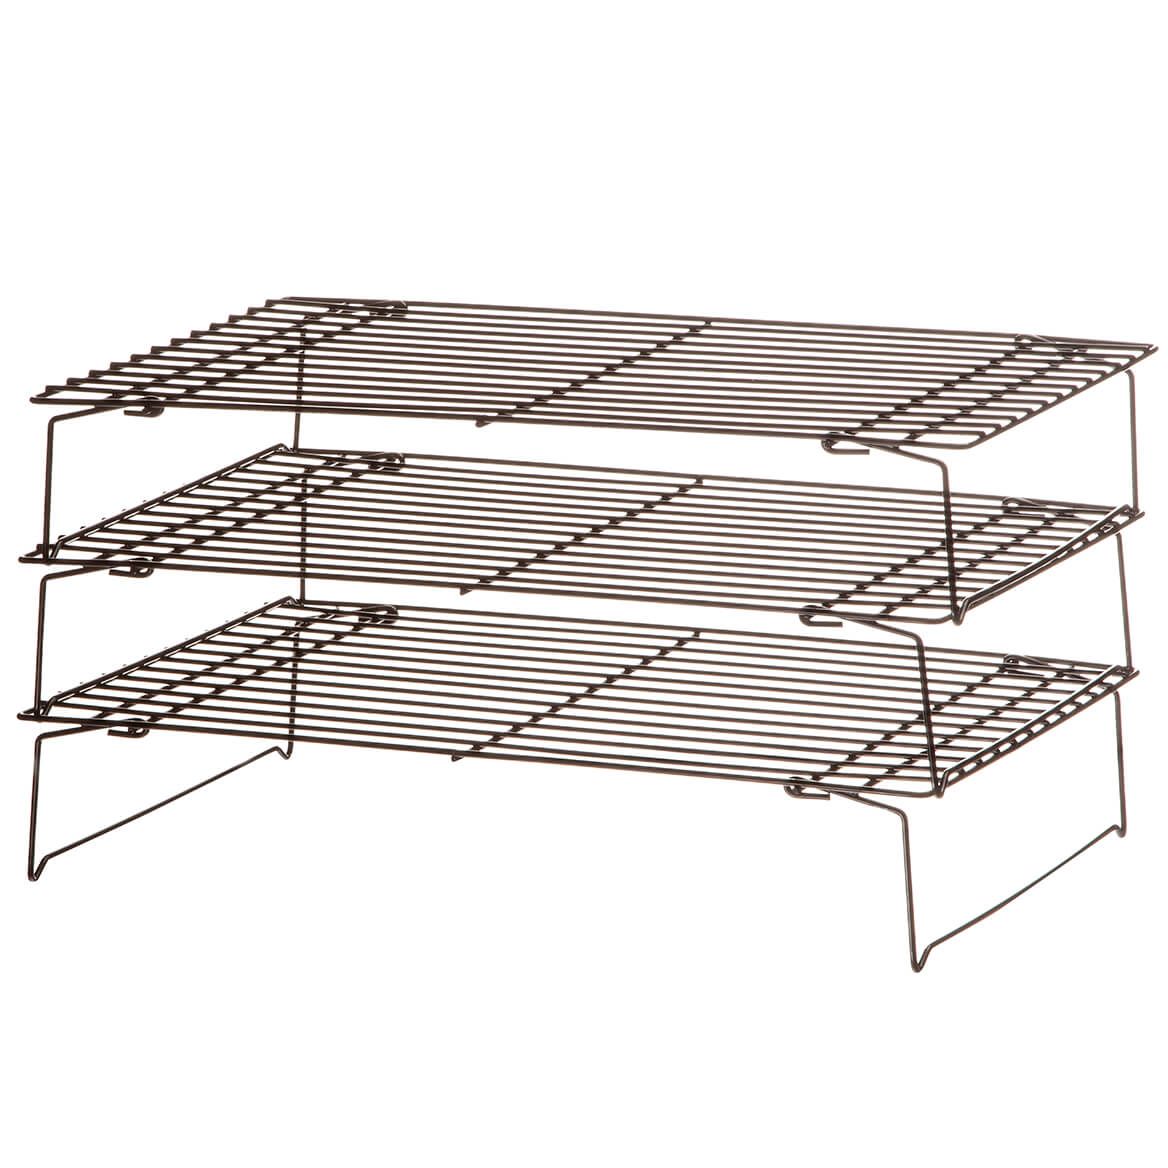 3 Piece Cooling Rack Set by Chefs Pride + '-' + 367502